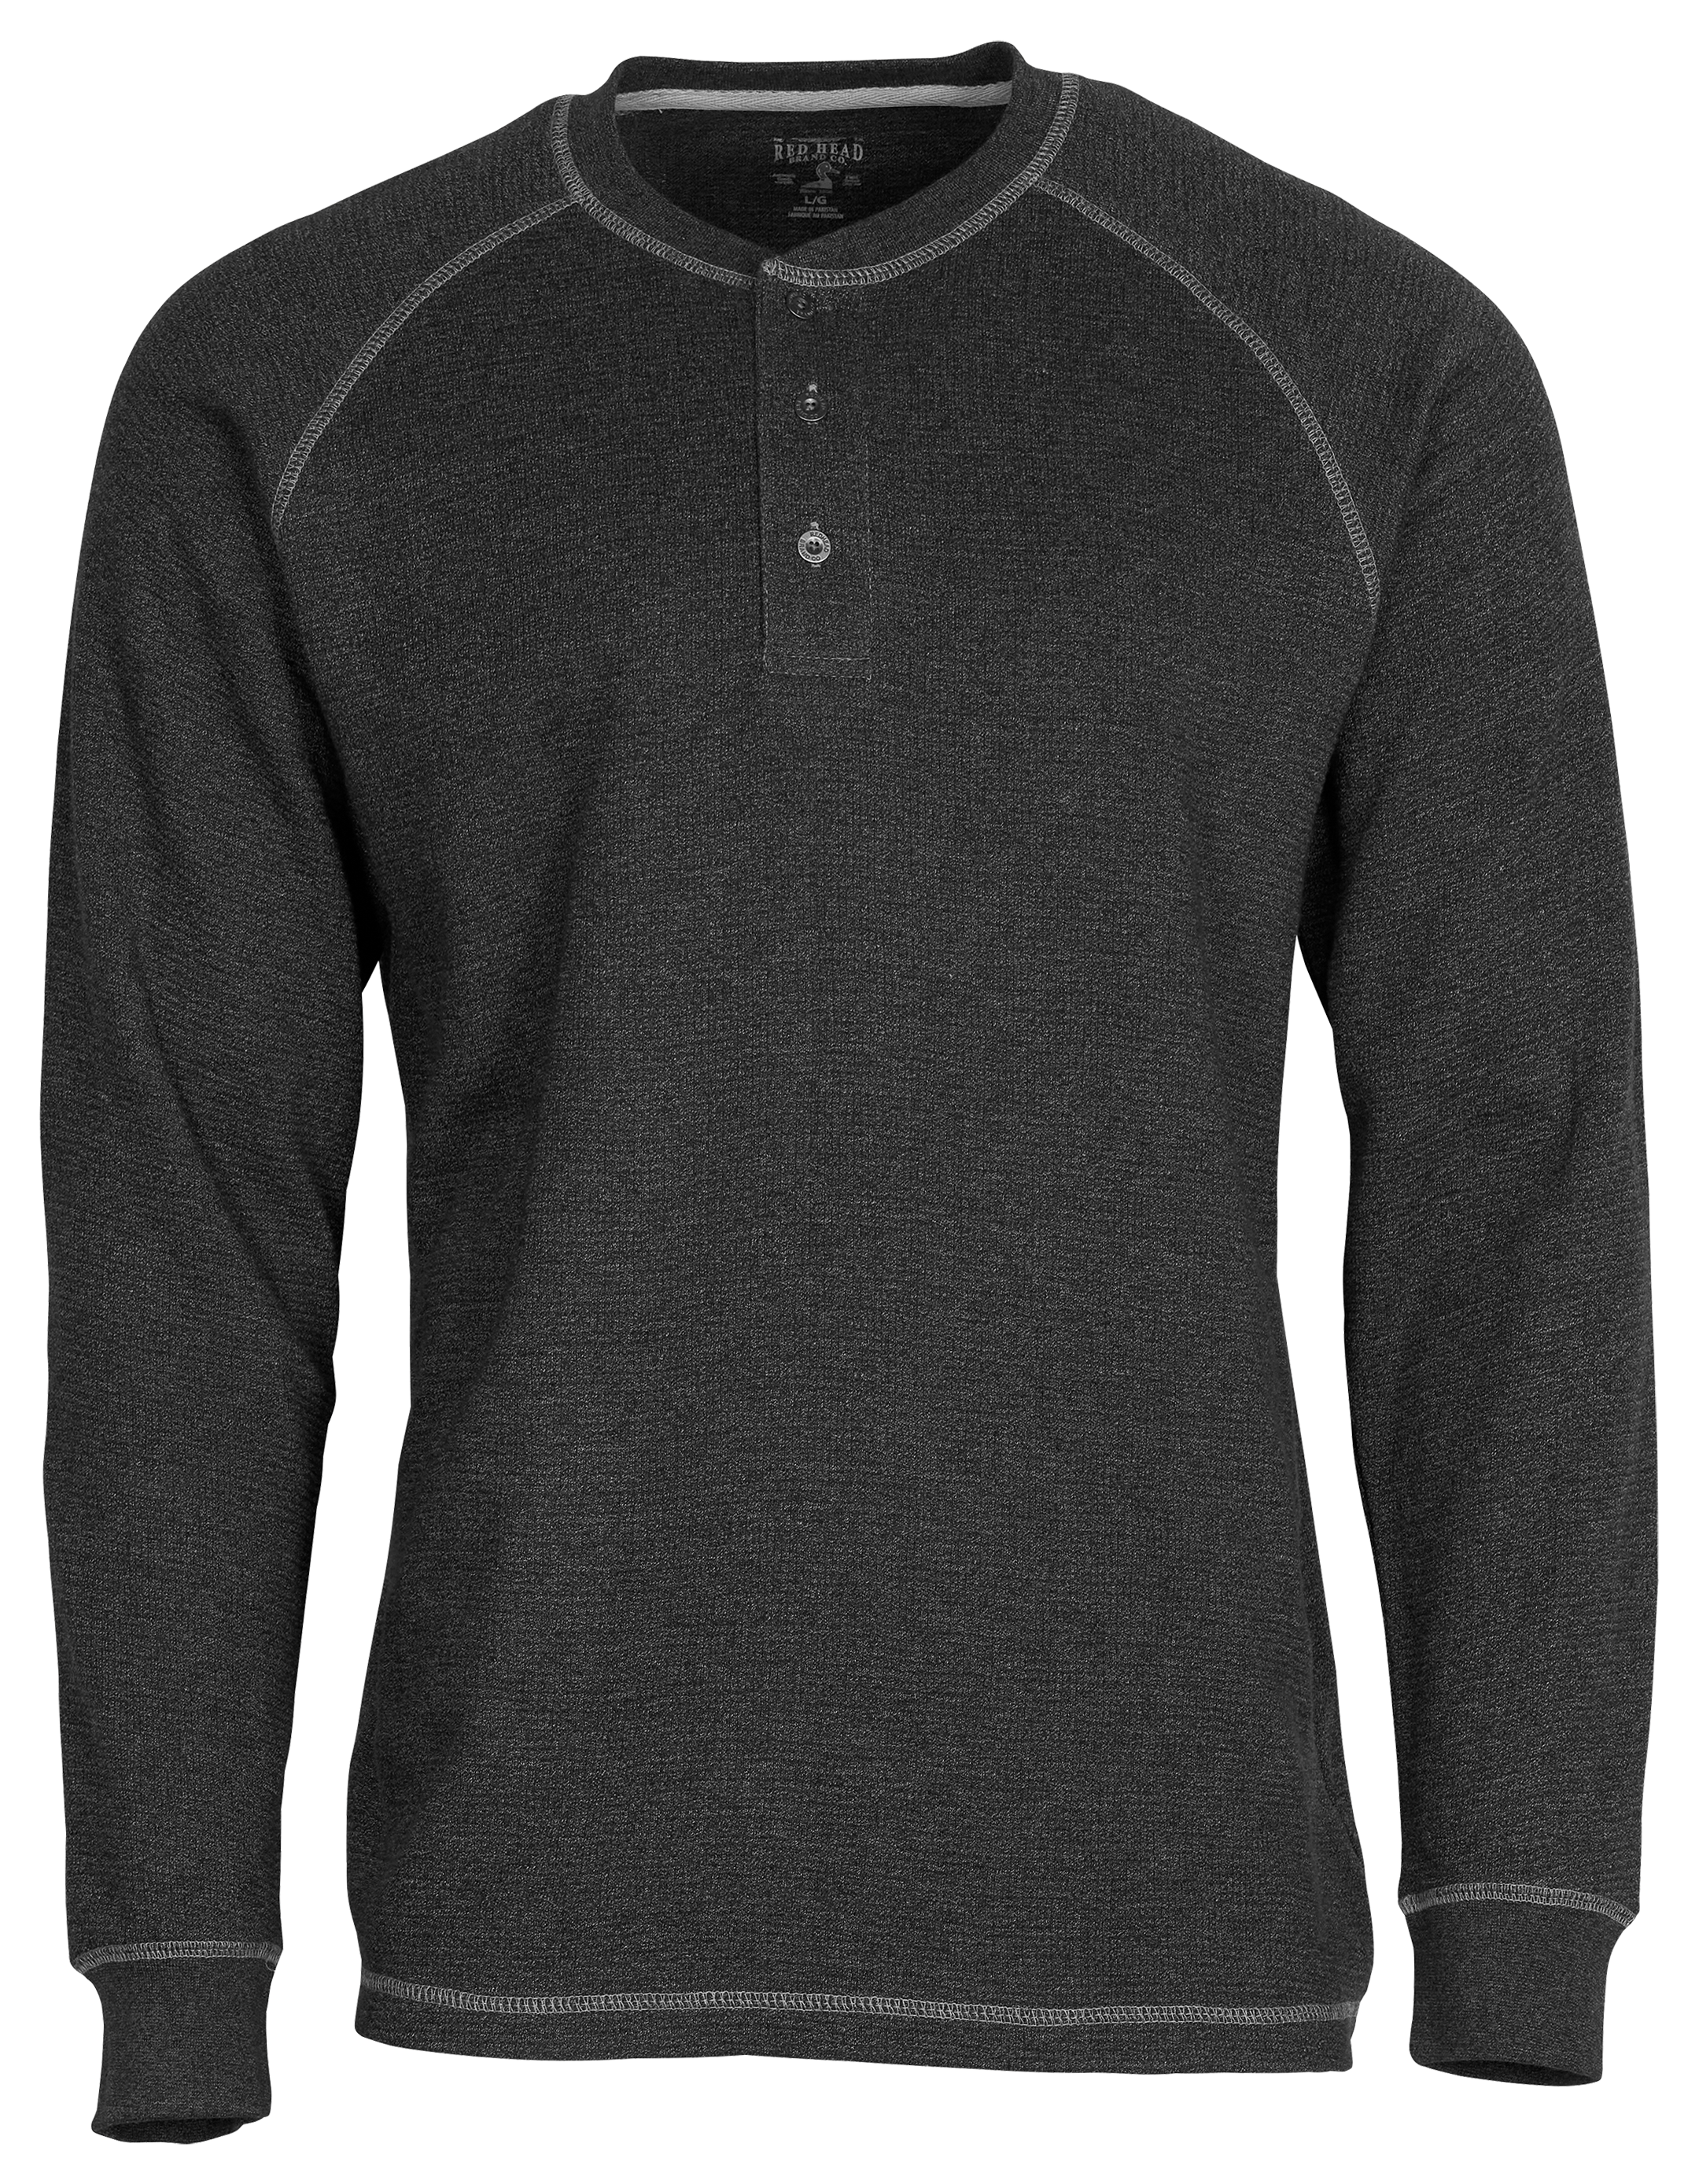 RedHead® Men's Ranch Grand Forks Waffle-Knit Long-Sleeve Henley